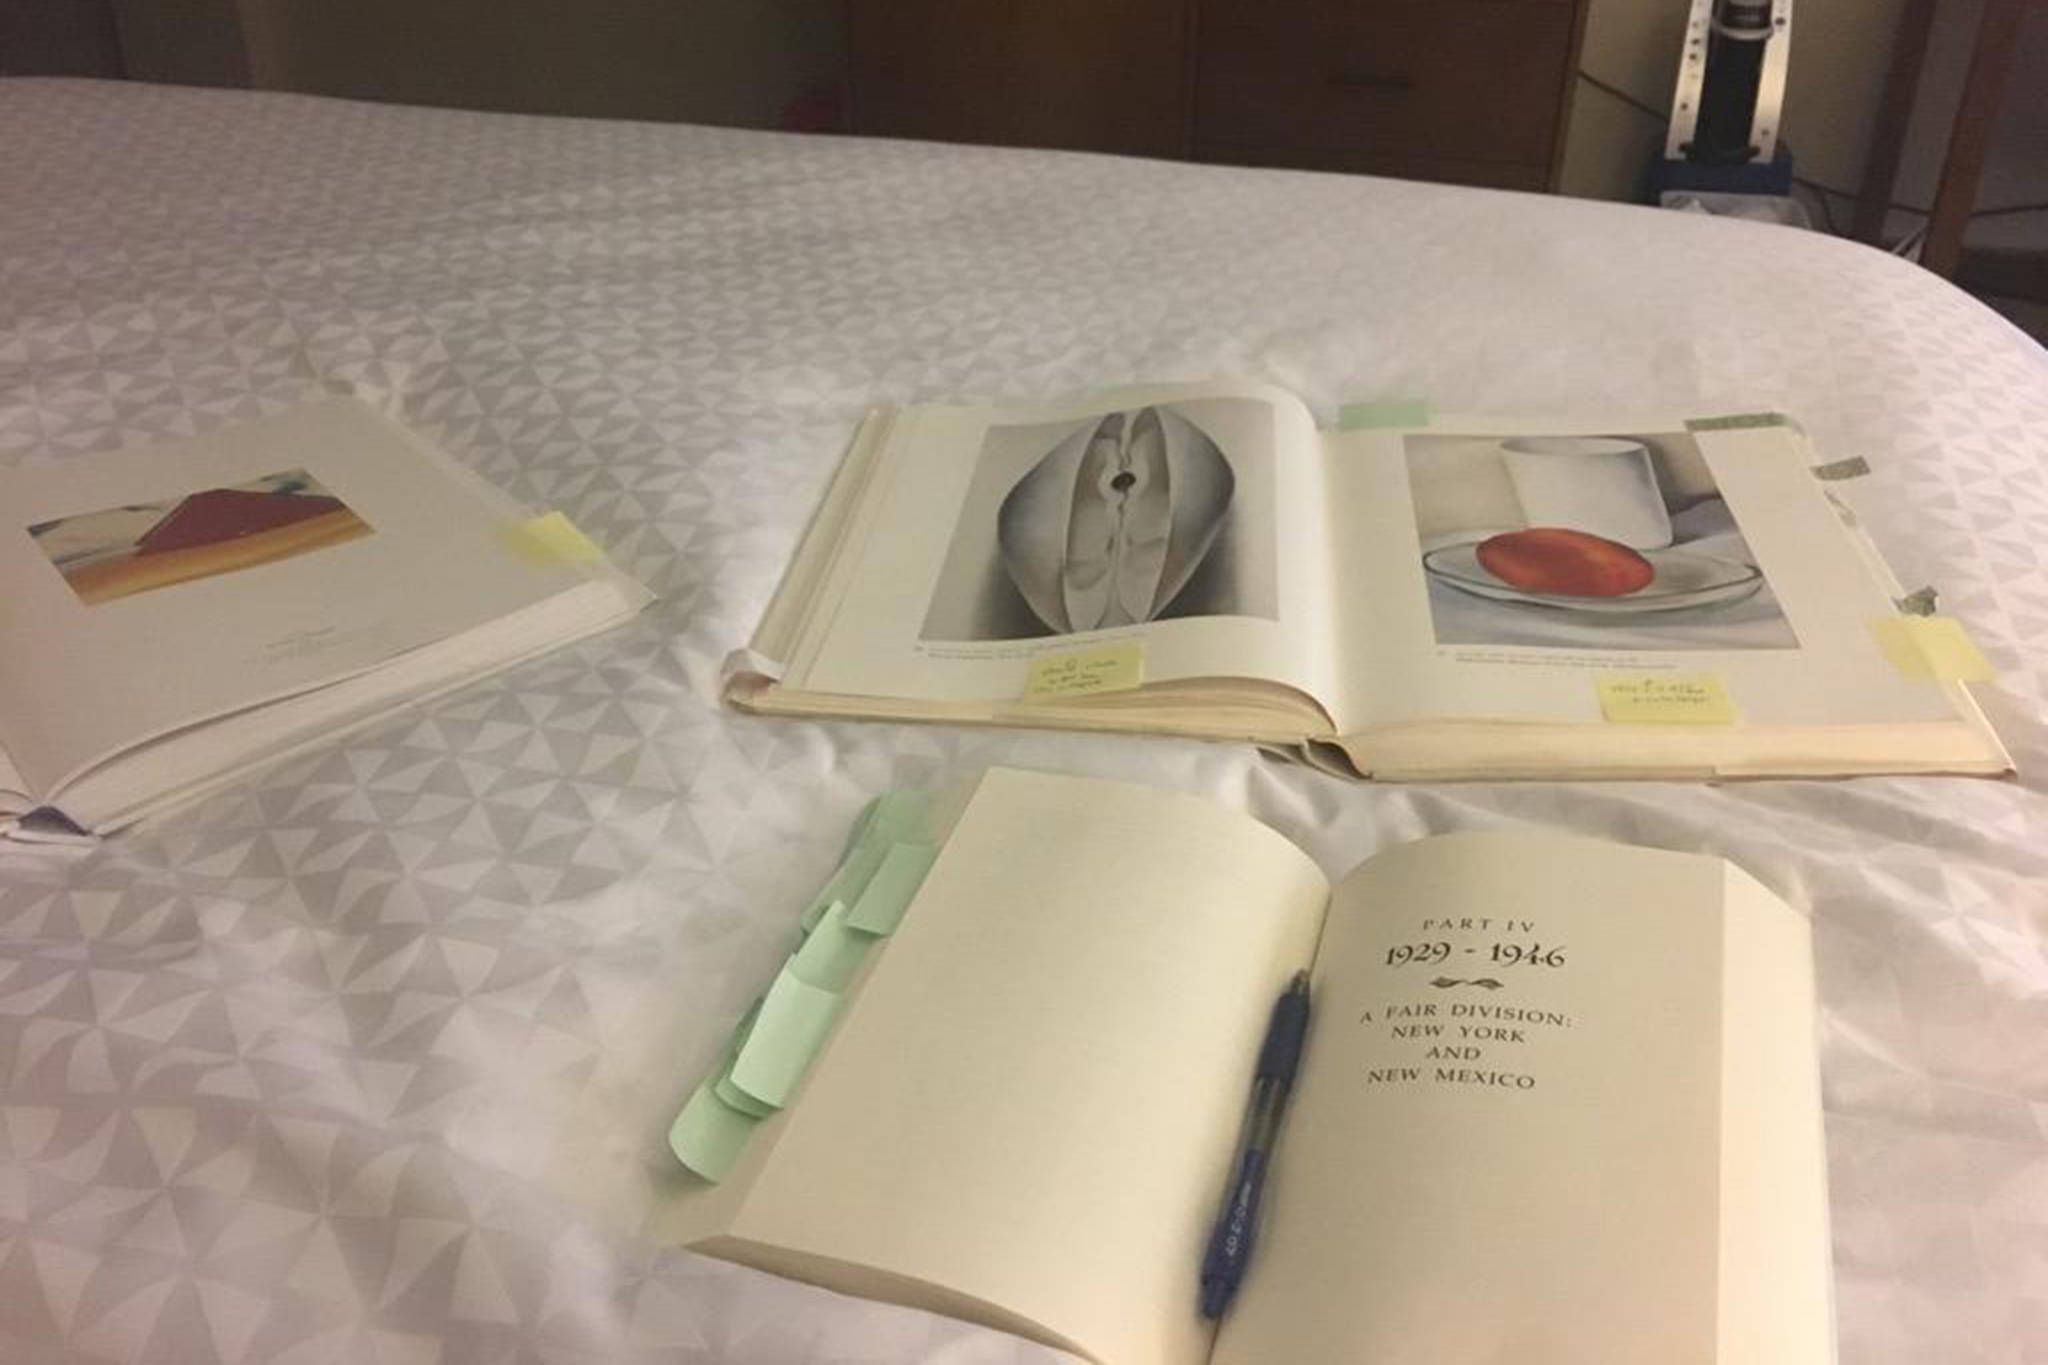 Emily Wall was able to procure a weekend residency and thousands of dollars of books thanks to her 2018 Rasmuson Fund Project Award. The award came with $7,500, which Wall said has greatly helped progress on a Georgia O’Keefe-inspired collection of poetry. (Courtesy Photo | Emily Wall)